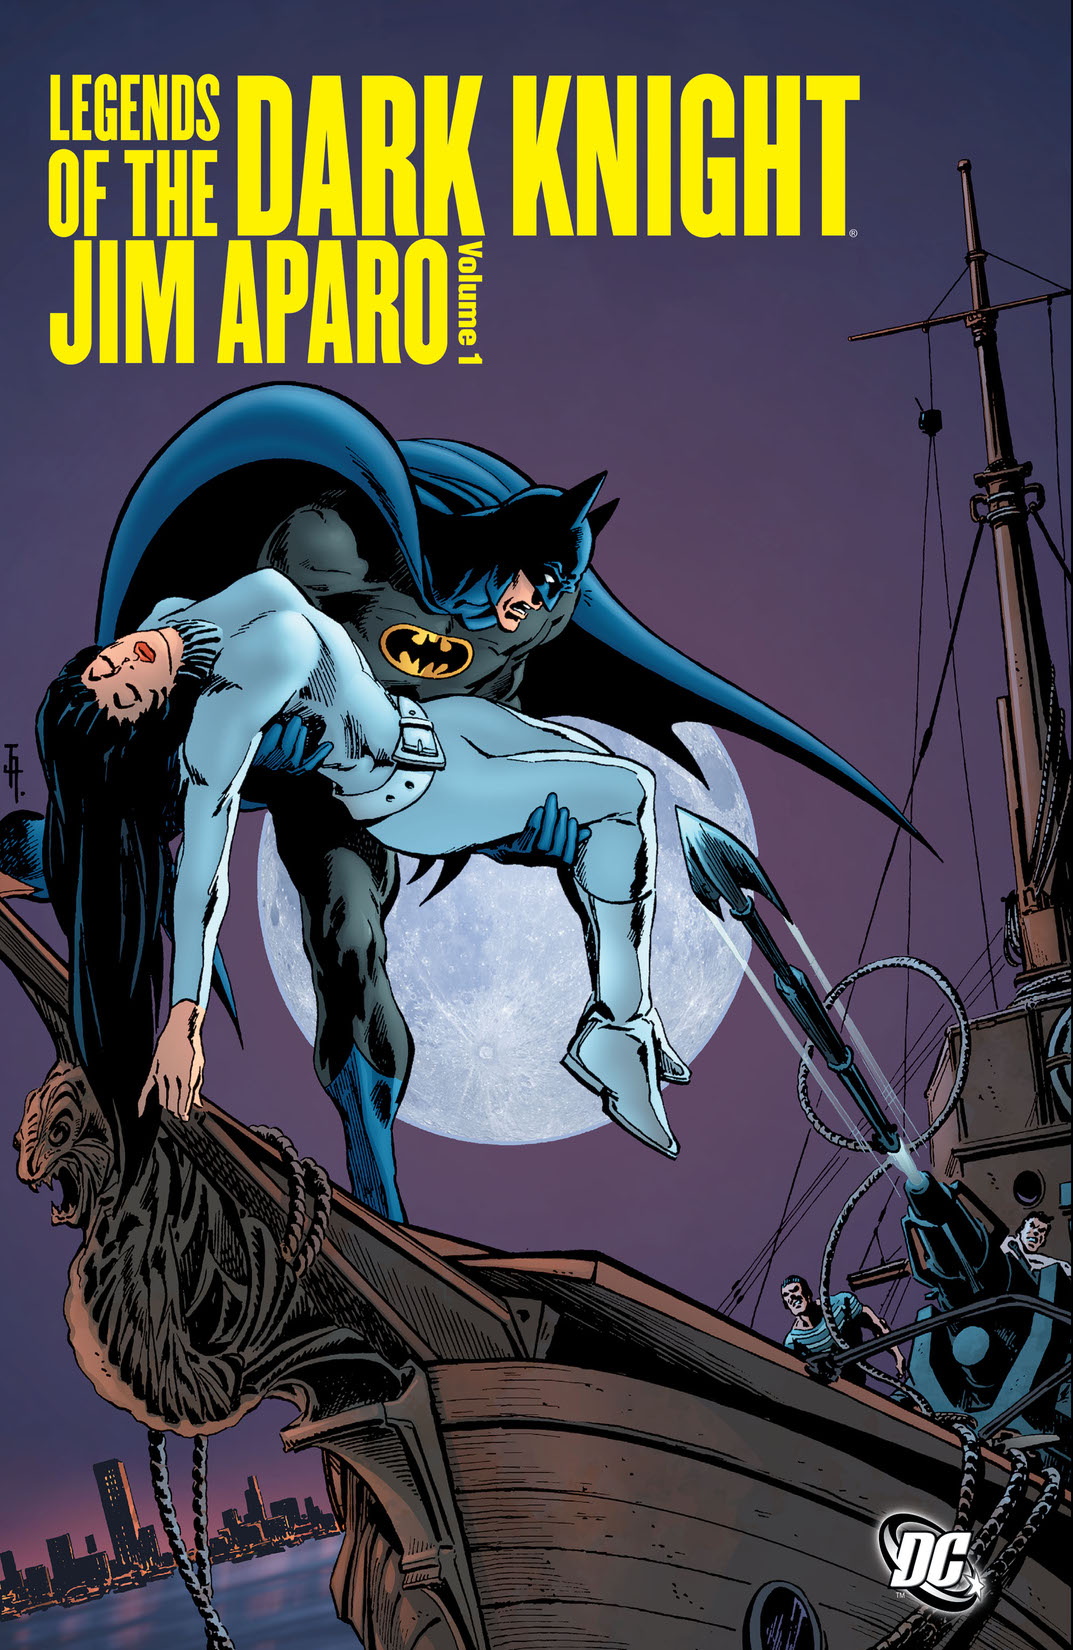 Legends of the Dark Knight: Jim Aparo Volume 1 preview images